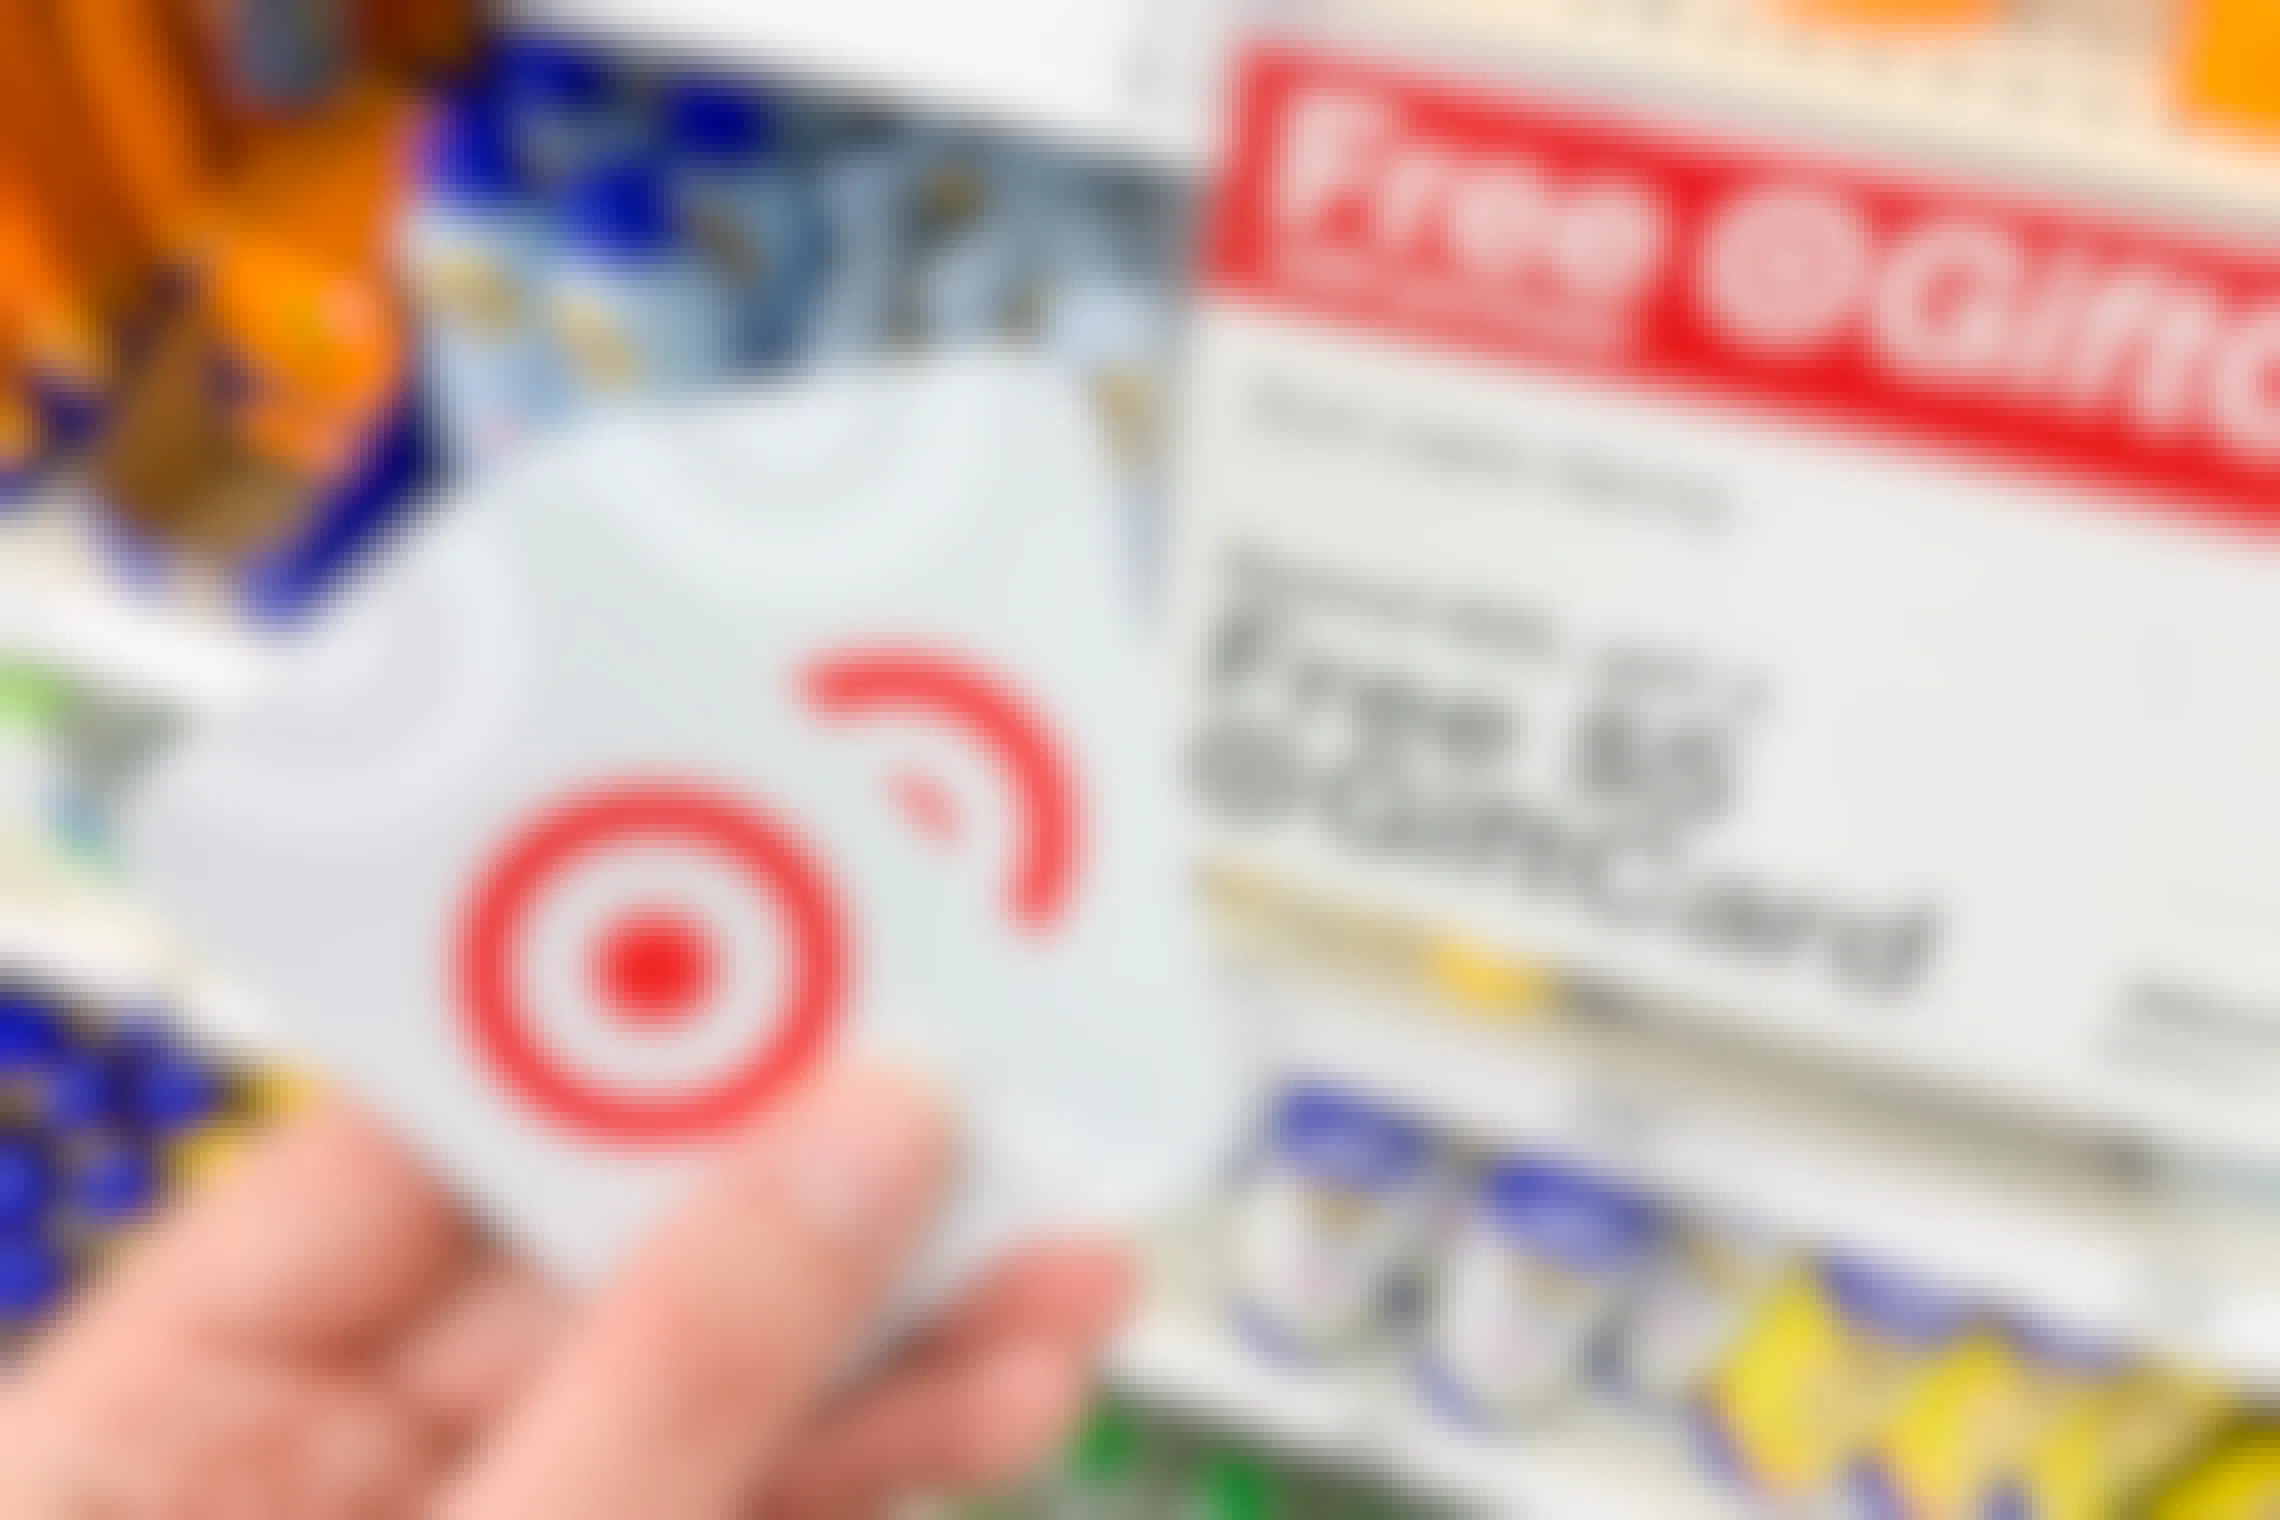 Two target gift cards with a "Free Gift Card" behind.